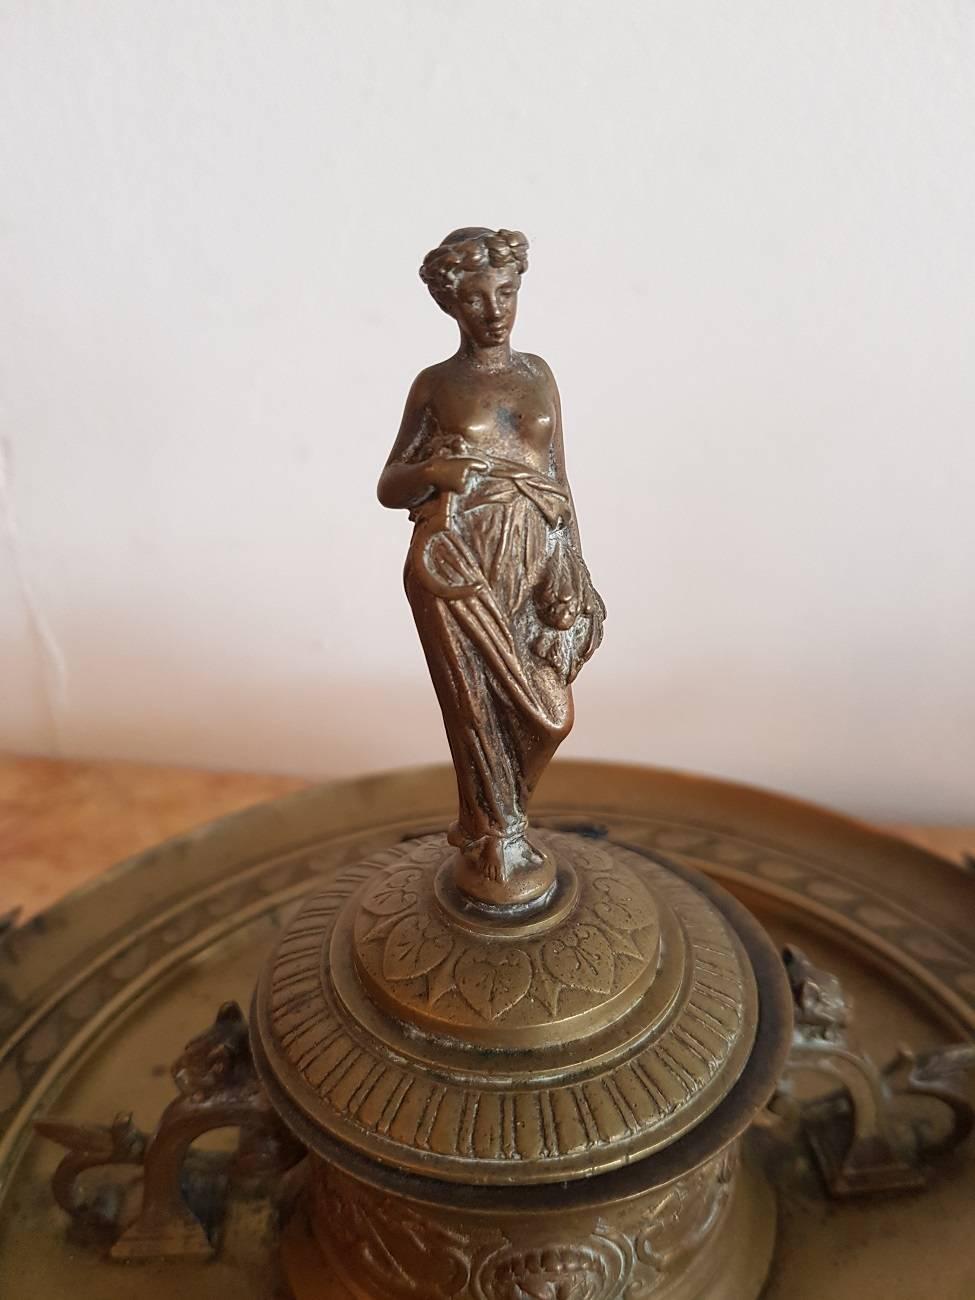 Late 19th century bronze inkwell holder with various decorations including a lady on the lid, the ears in an Art Nouveau shape with leaves and on both sides of the inkwell animal heads. The glass jar has some chips.

The measurements are,
Depth